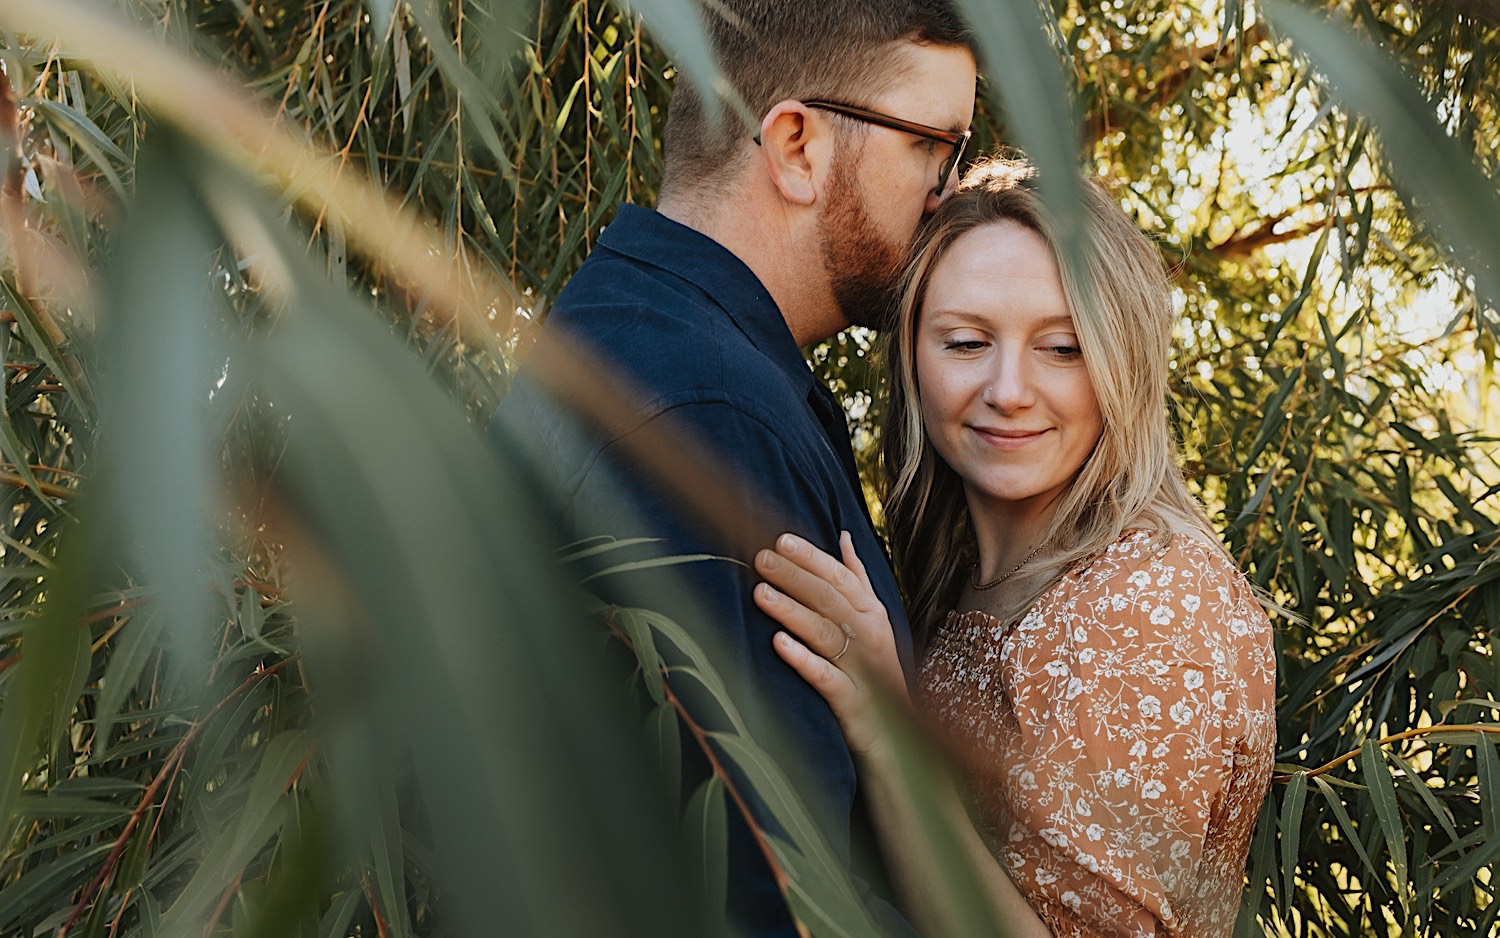 During a fall engagement session in Winona a couple embrace as the man kisses the woman on the temple while she smiles and looks to the right as the two are surrounded by the leaves of a tree